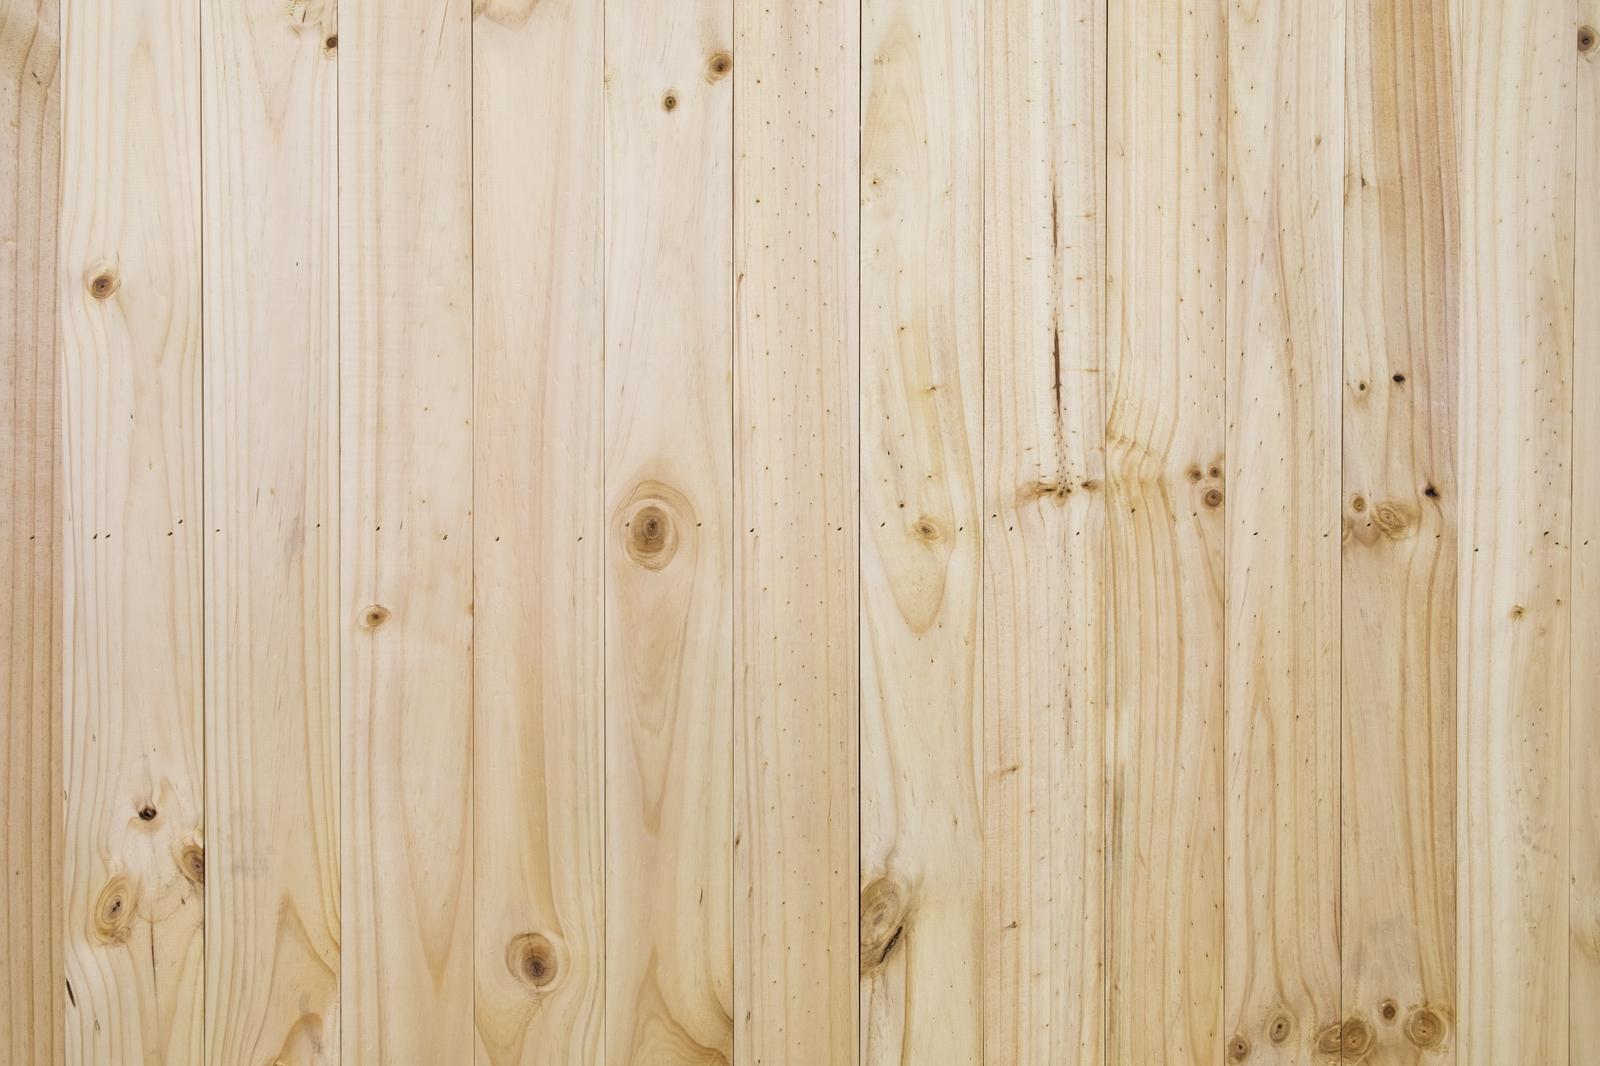 Manufacture of sawn timber in Tartu county